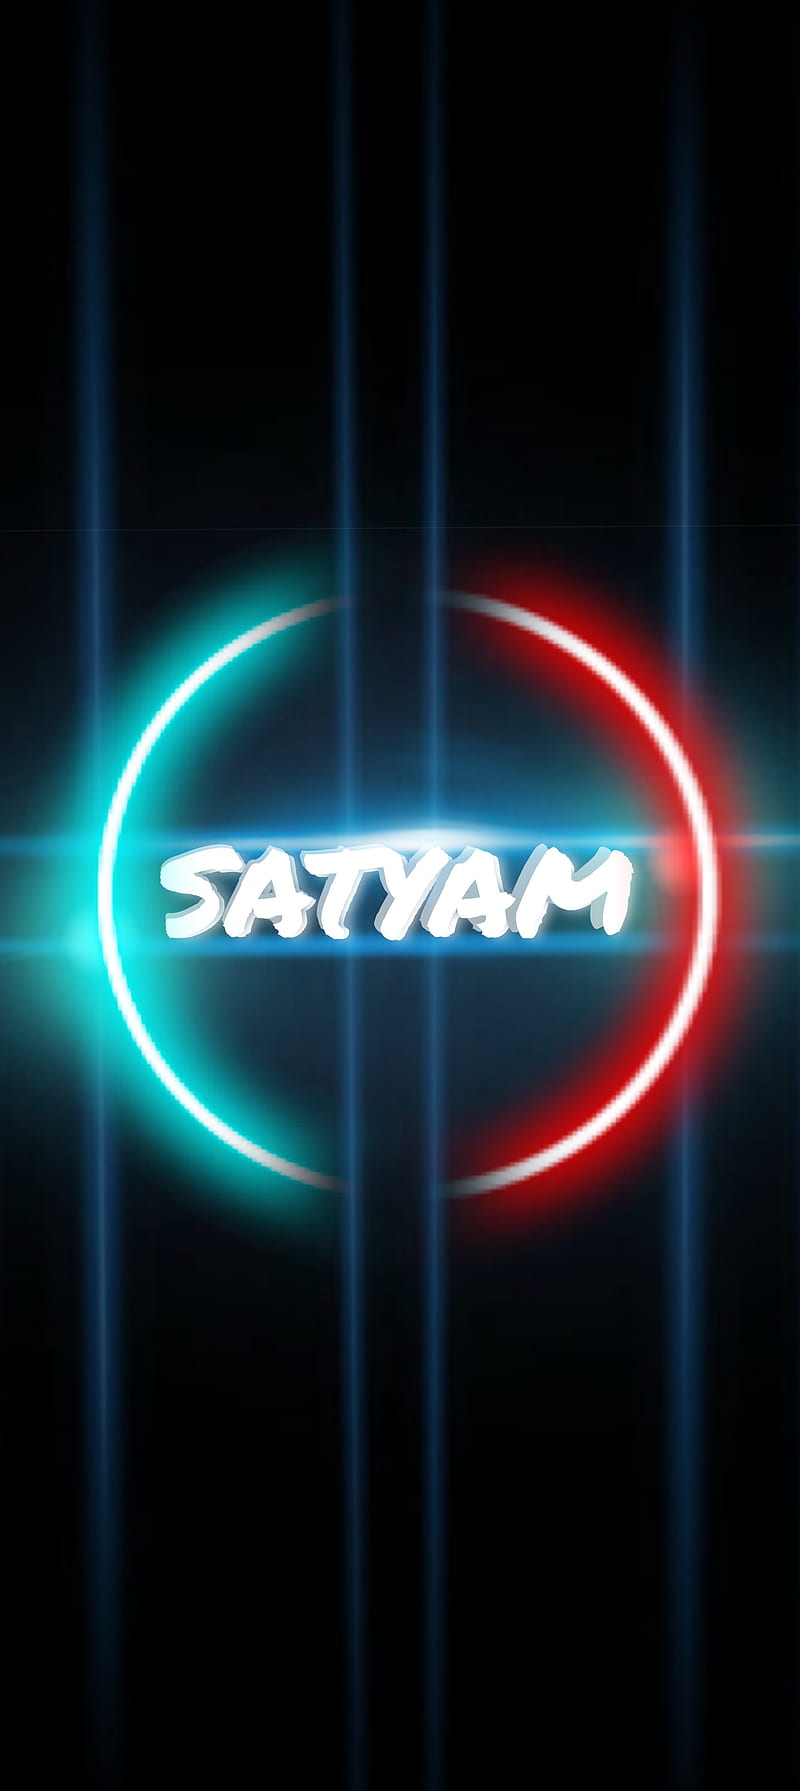 SY Gifts Cricket Bat Logo Design With Satyam Name Key Chain Price in India  - Buy SY Gifts Cricket Bat Logo Design With Satyam Name Key Chain online at  Flipkart.com